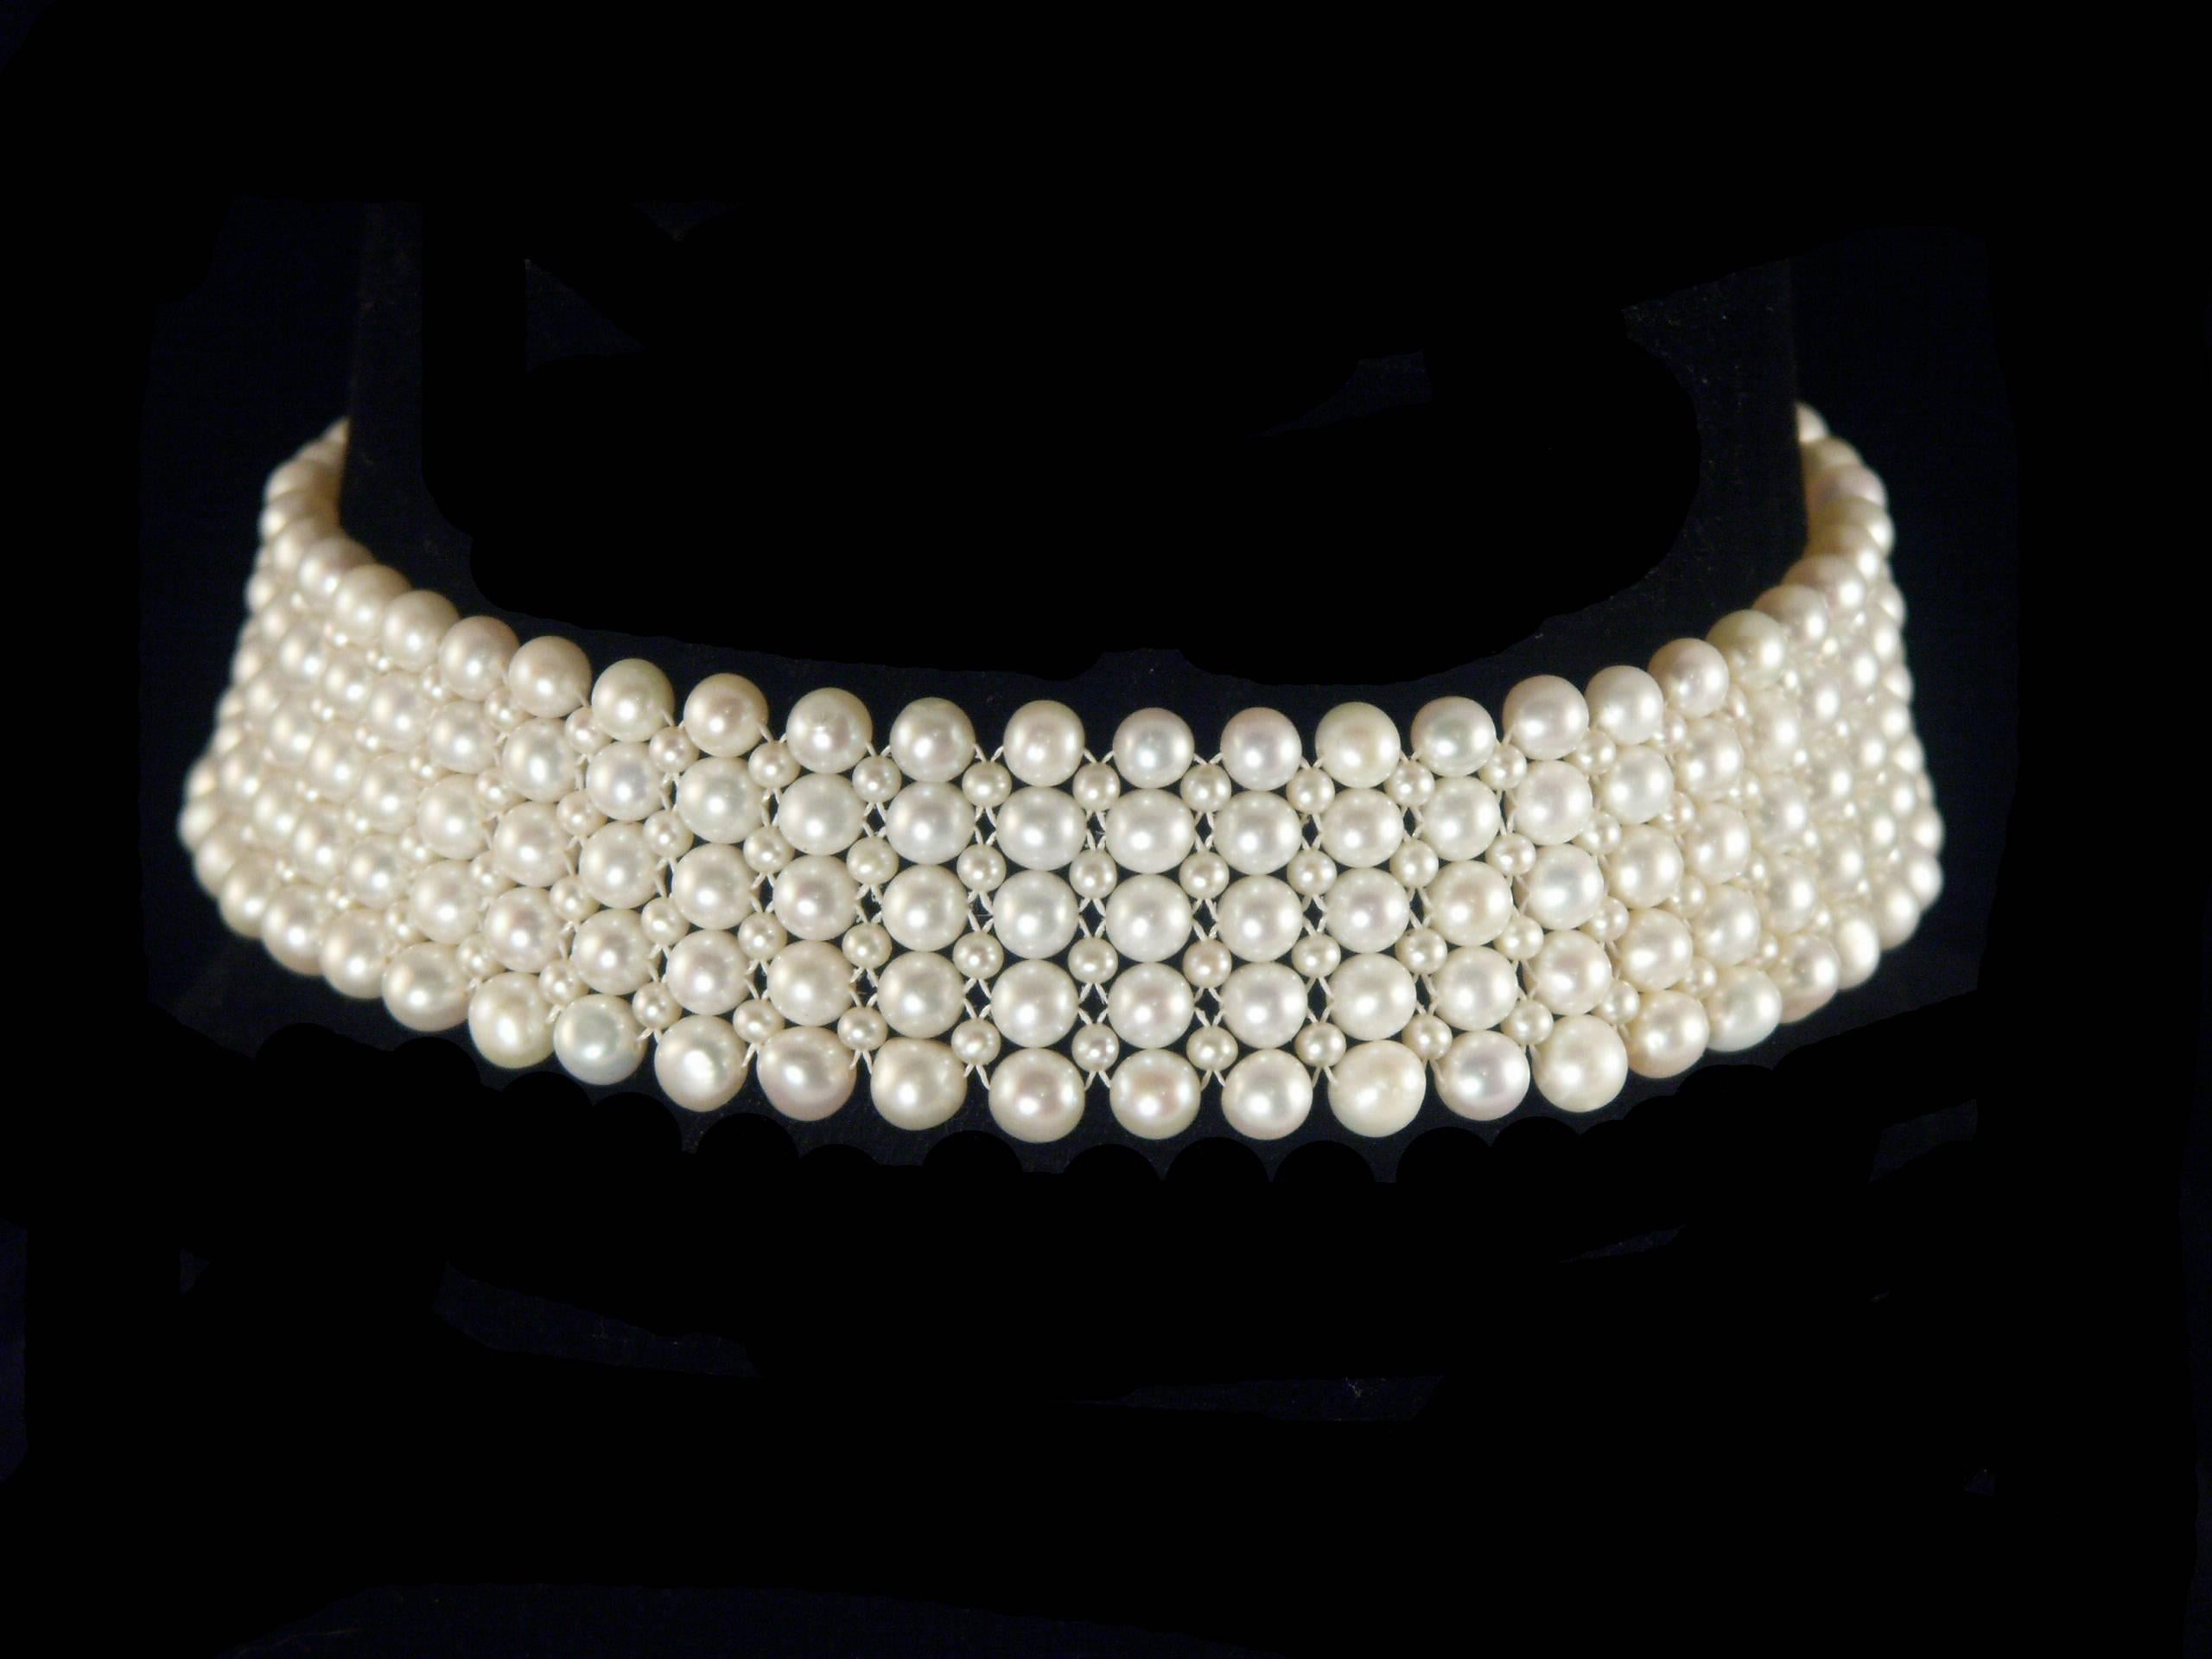 Beautiful and elegant piece by Marina J. This lovely Choker is made using 3mm and 6mm cultured Pearls all woven together into a fine lace like design. Measuring 13.5 inches long, this piece meets at a decorative White Gold plated Silver stamped